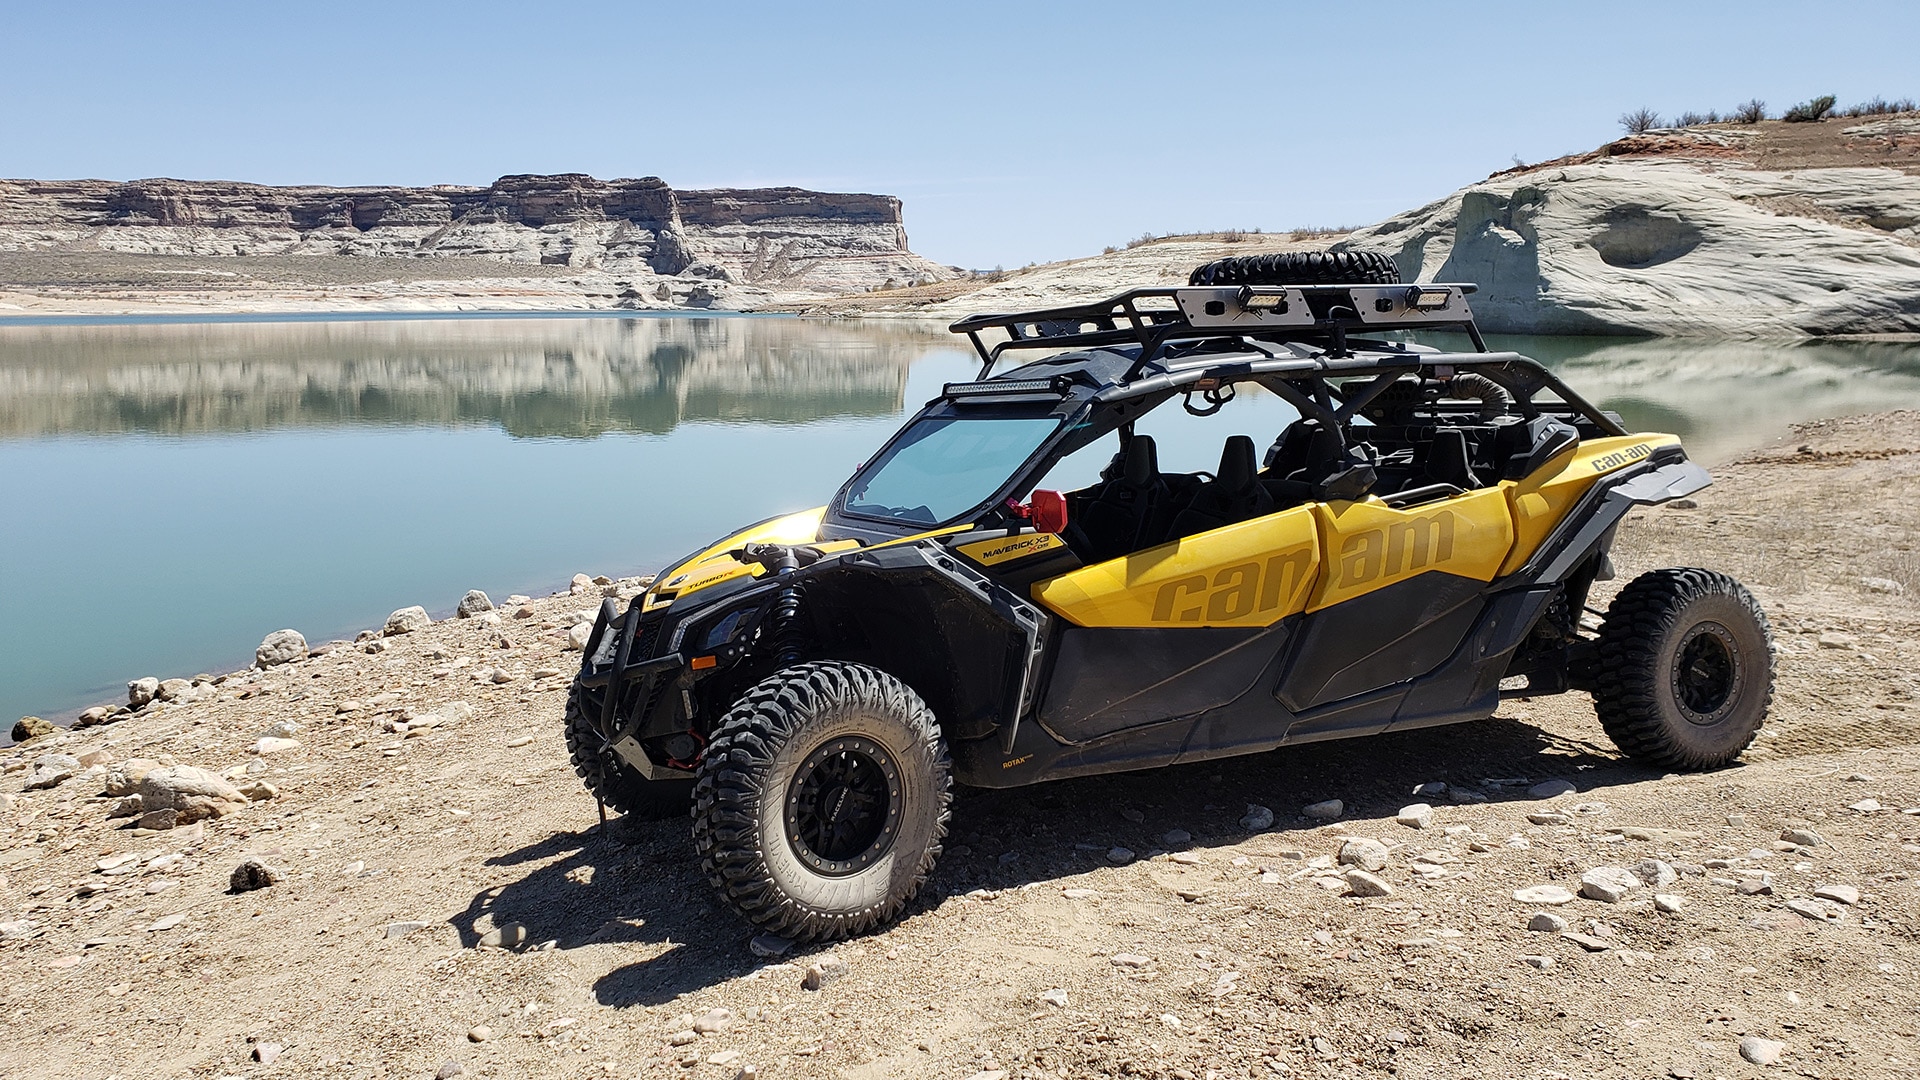 A Can-Am SxS vehicle parked near a lake